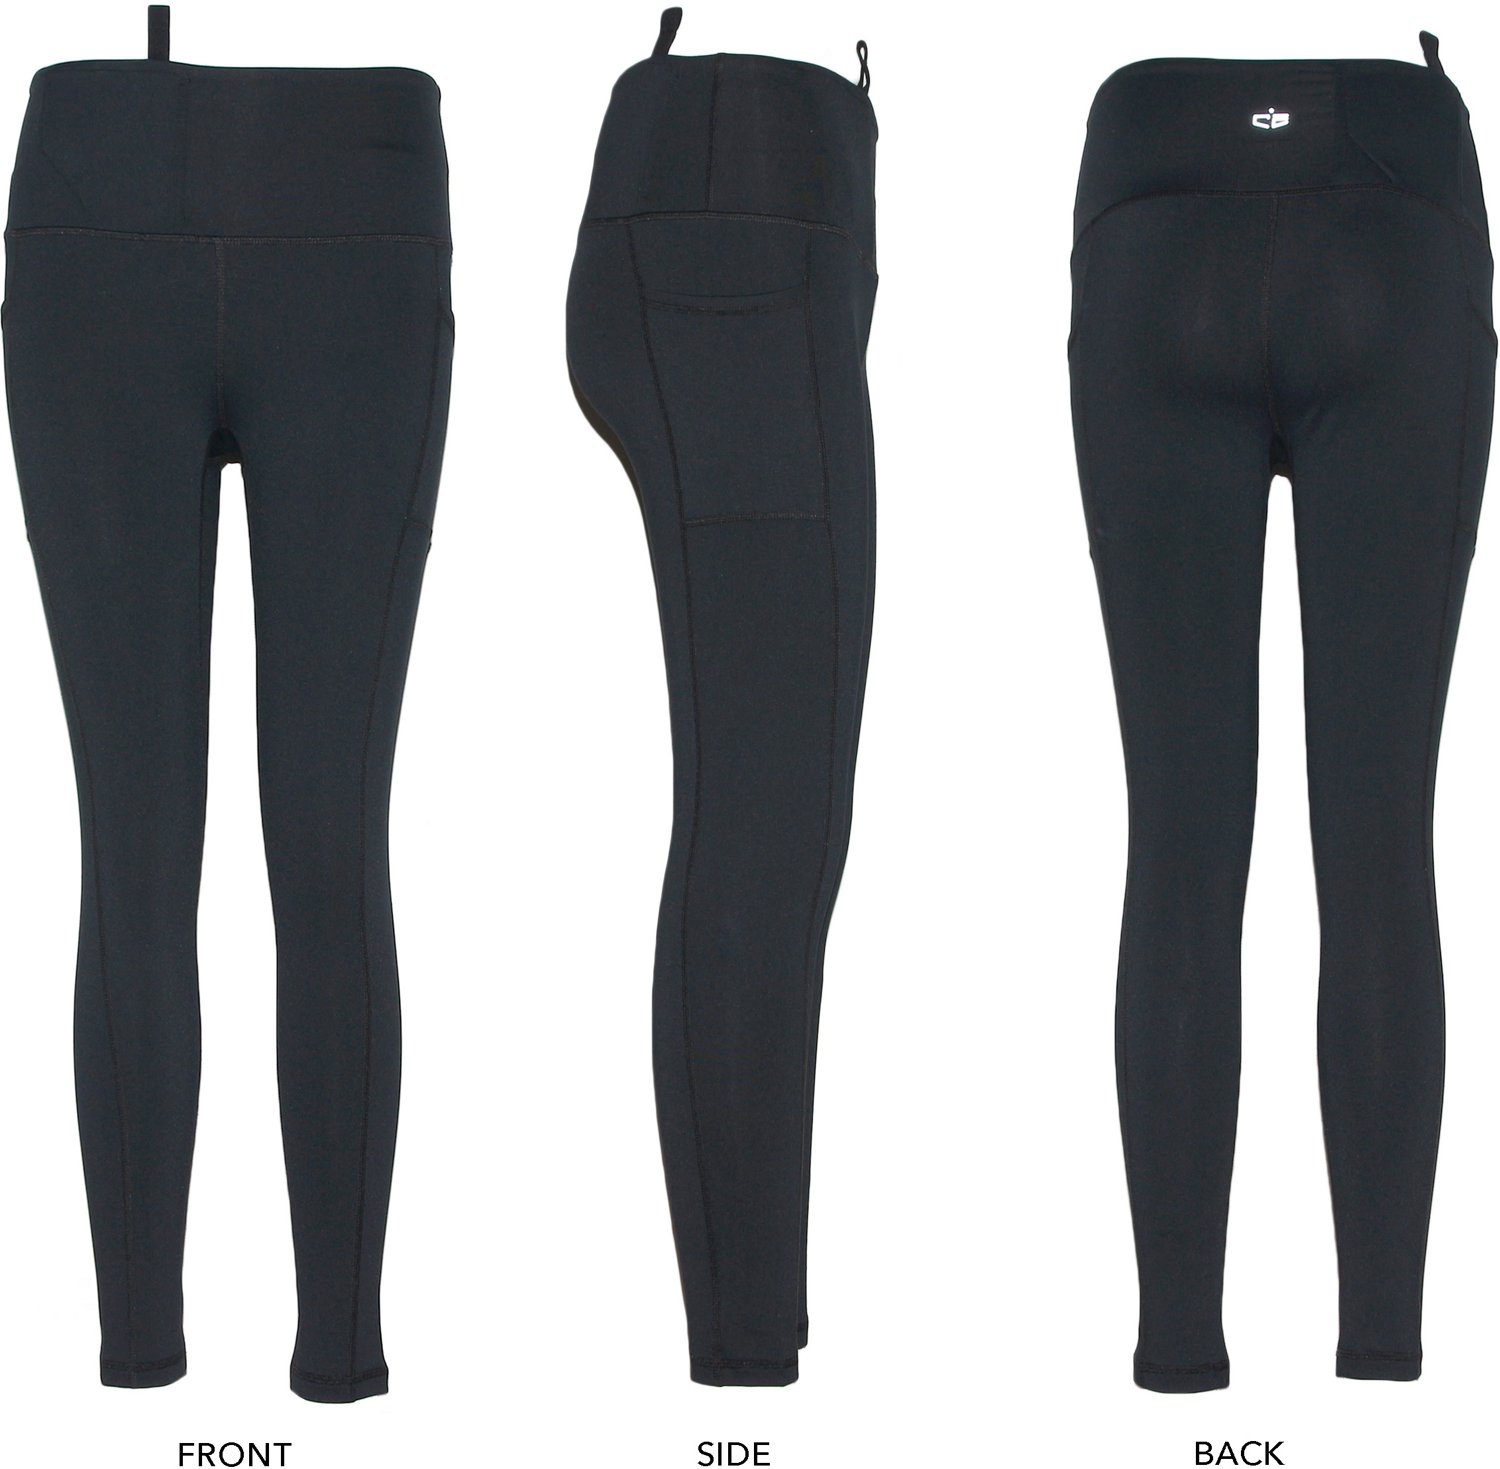 Concealment Express Women's Concealed Carry 7/8 Length Leggings